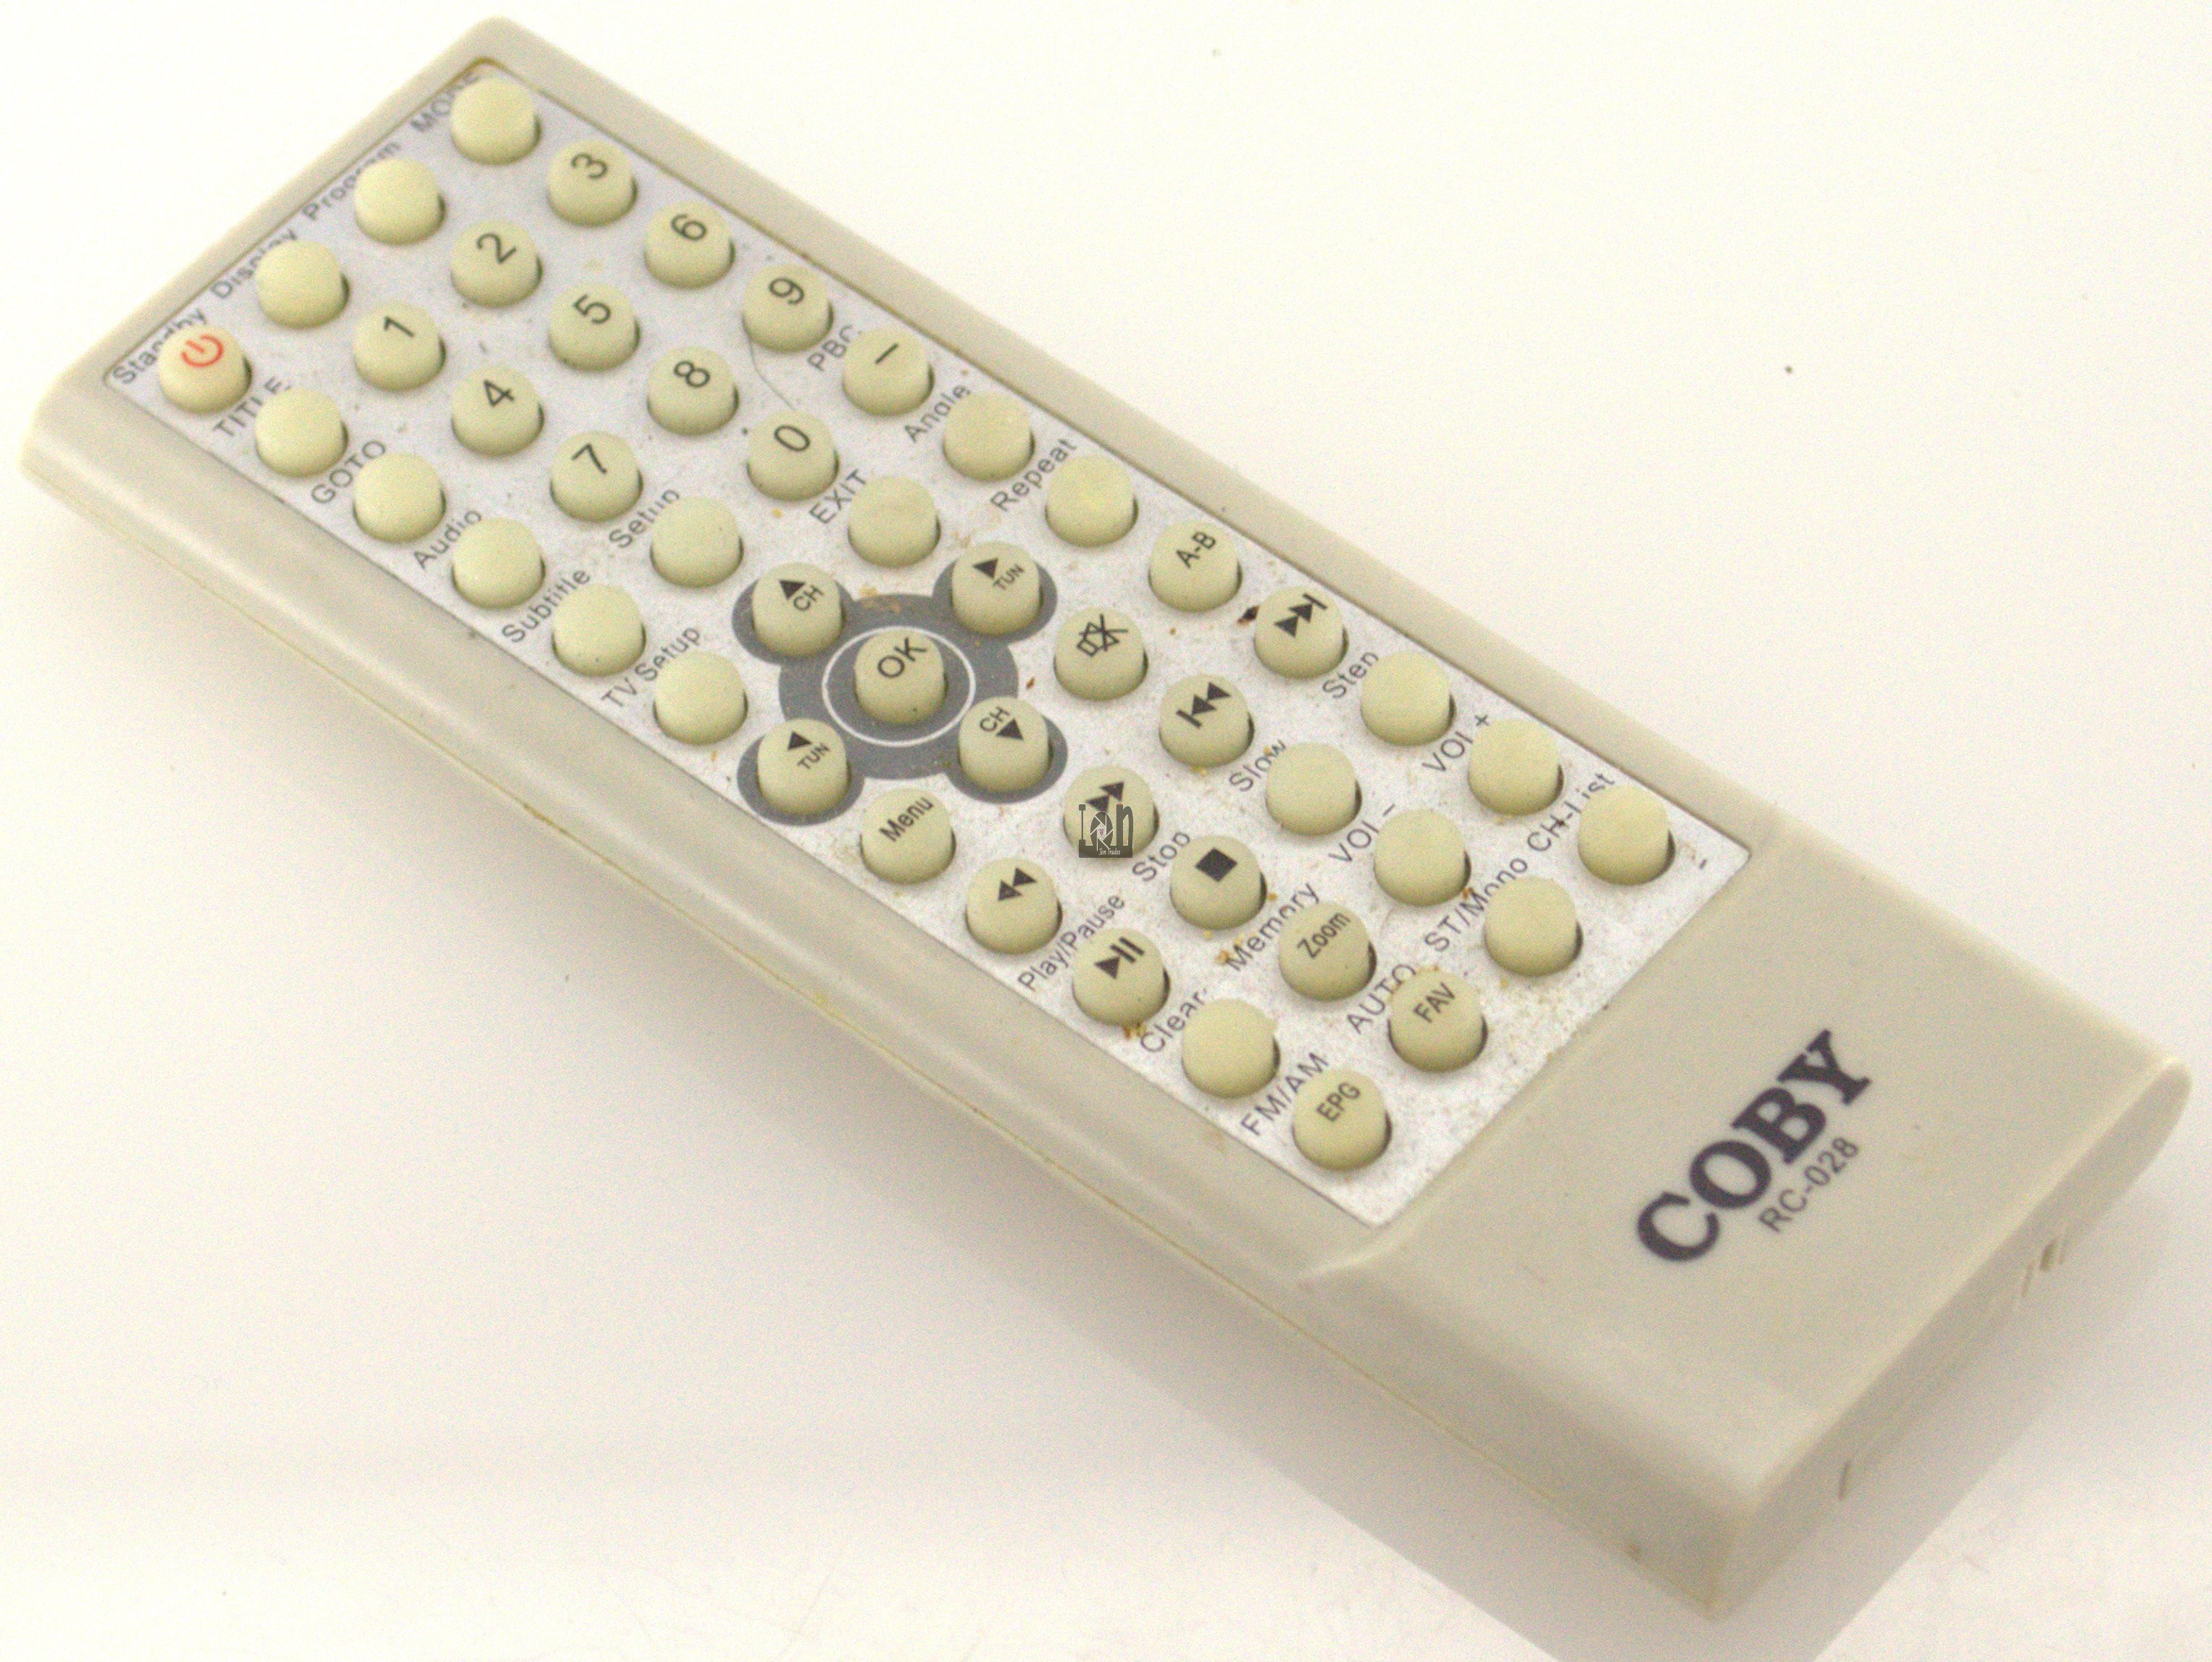 RC-028 Coby Remote Control for DVD Player